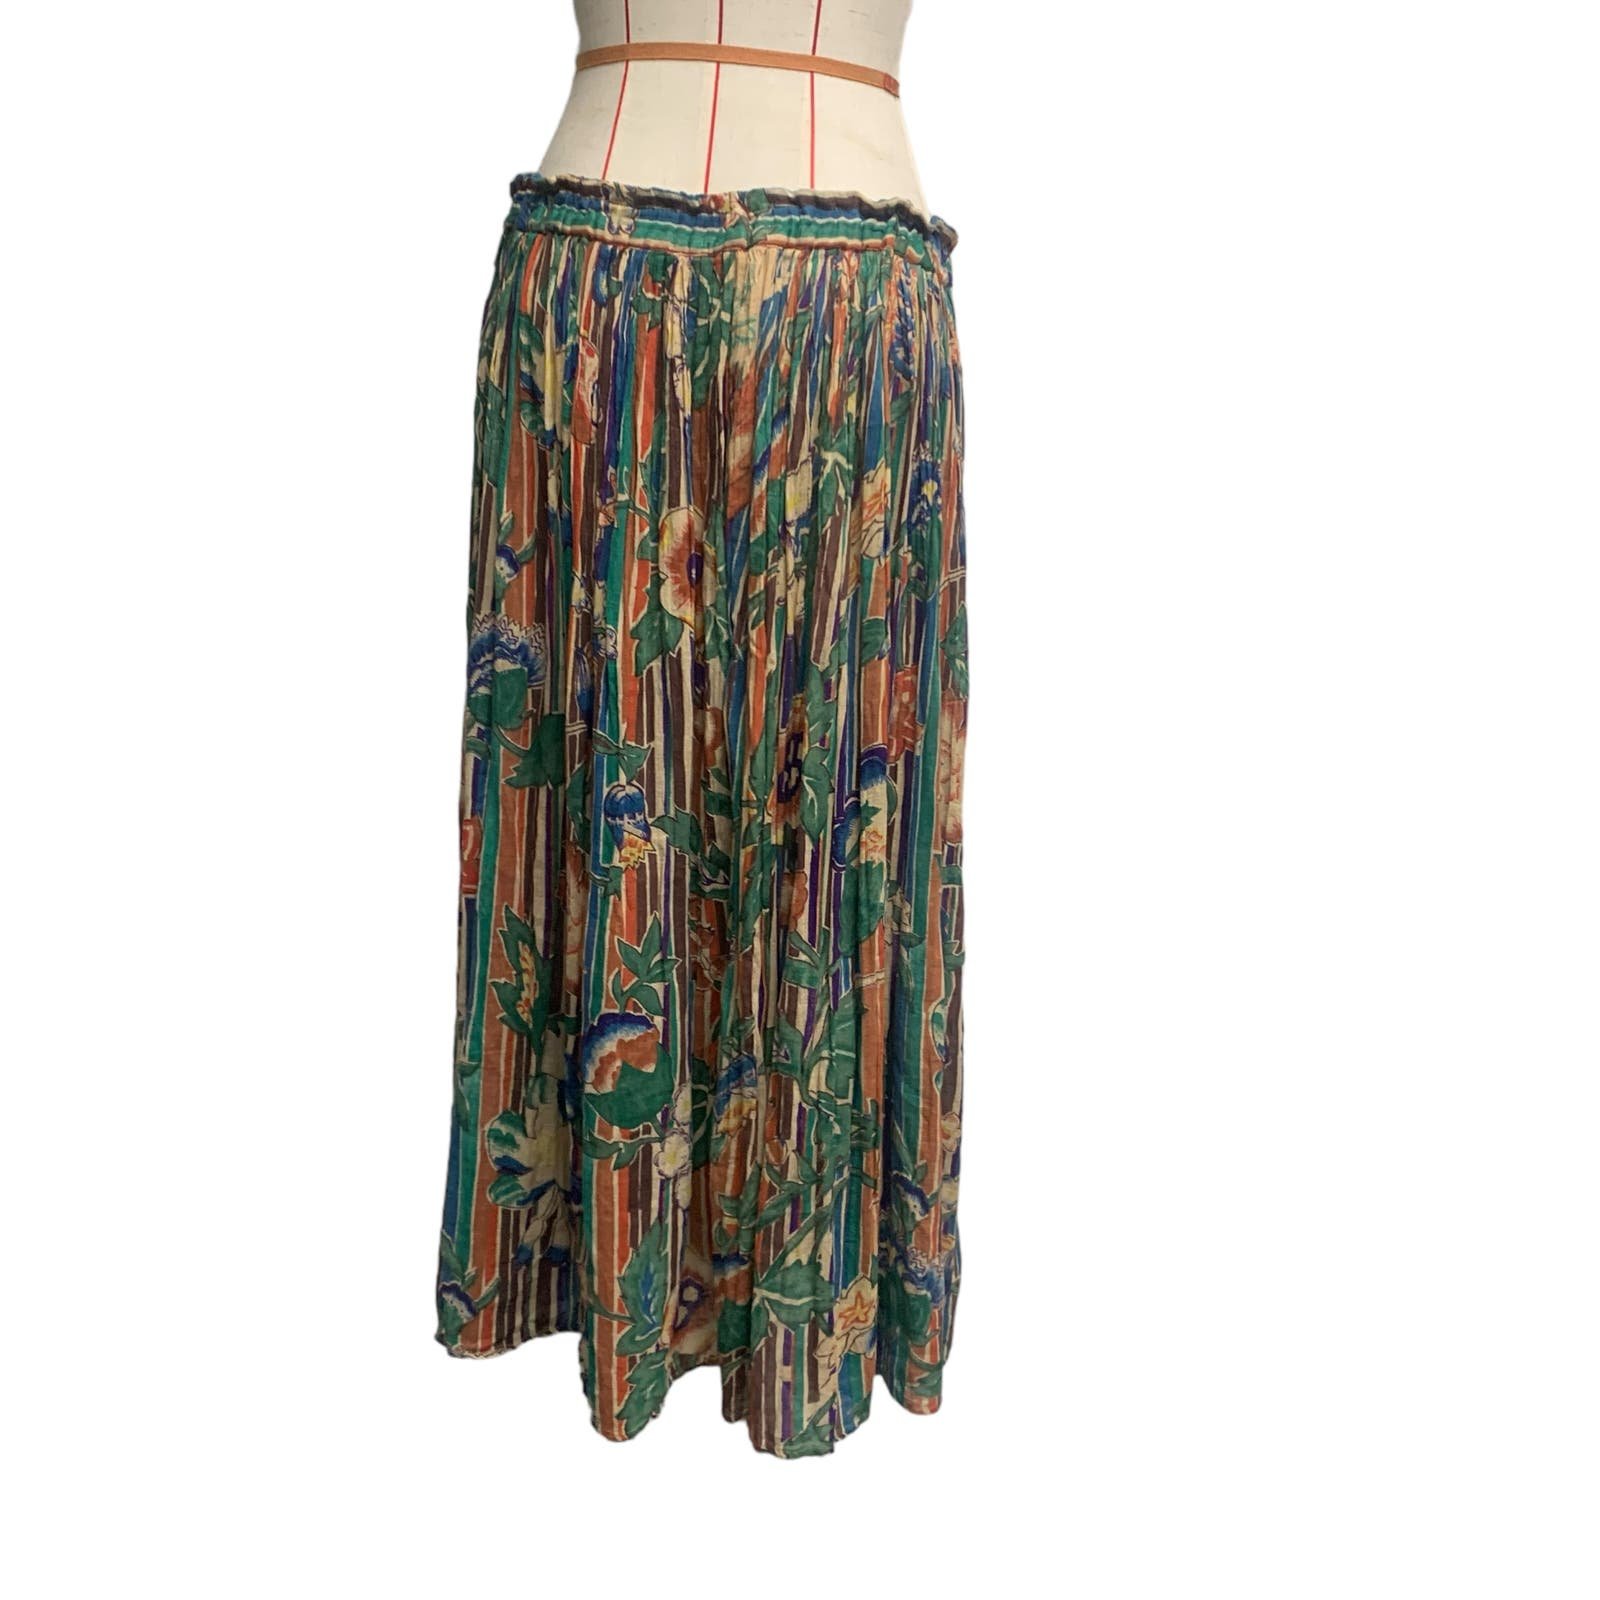 large discount Vintage Bila Womens Size M Colorful Printed Pleated Skirt fFNRcTk5r online store